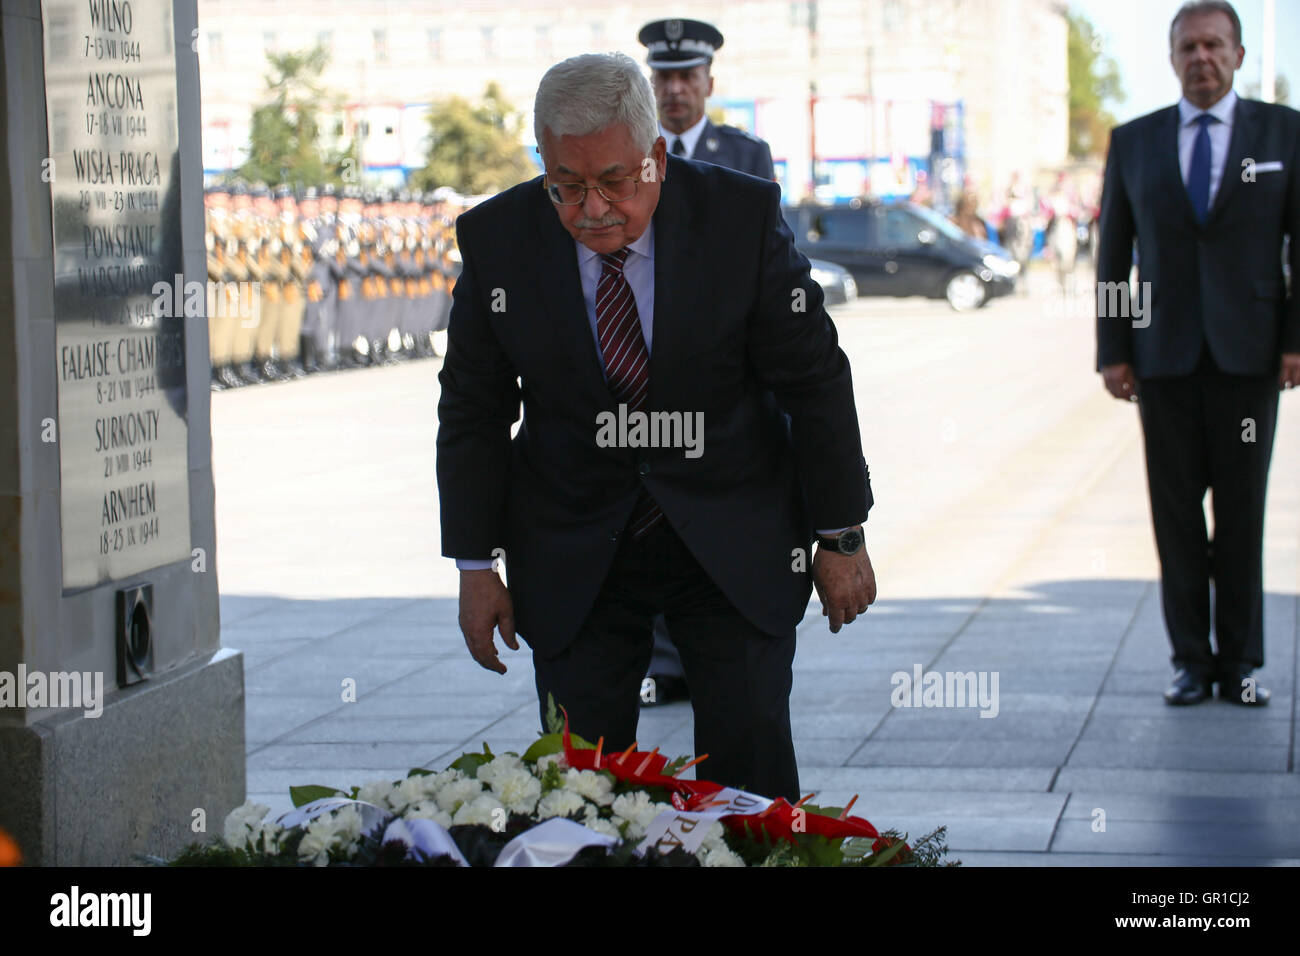 Poland, Warsaw, 6th September 2016: Palestinian President Mahmoud Abbas during wreath laying ceremony at the Memorial of the Unknown Soldier. Credit: Jake Ratz/Alamy Live News Stock Photo